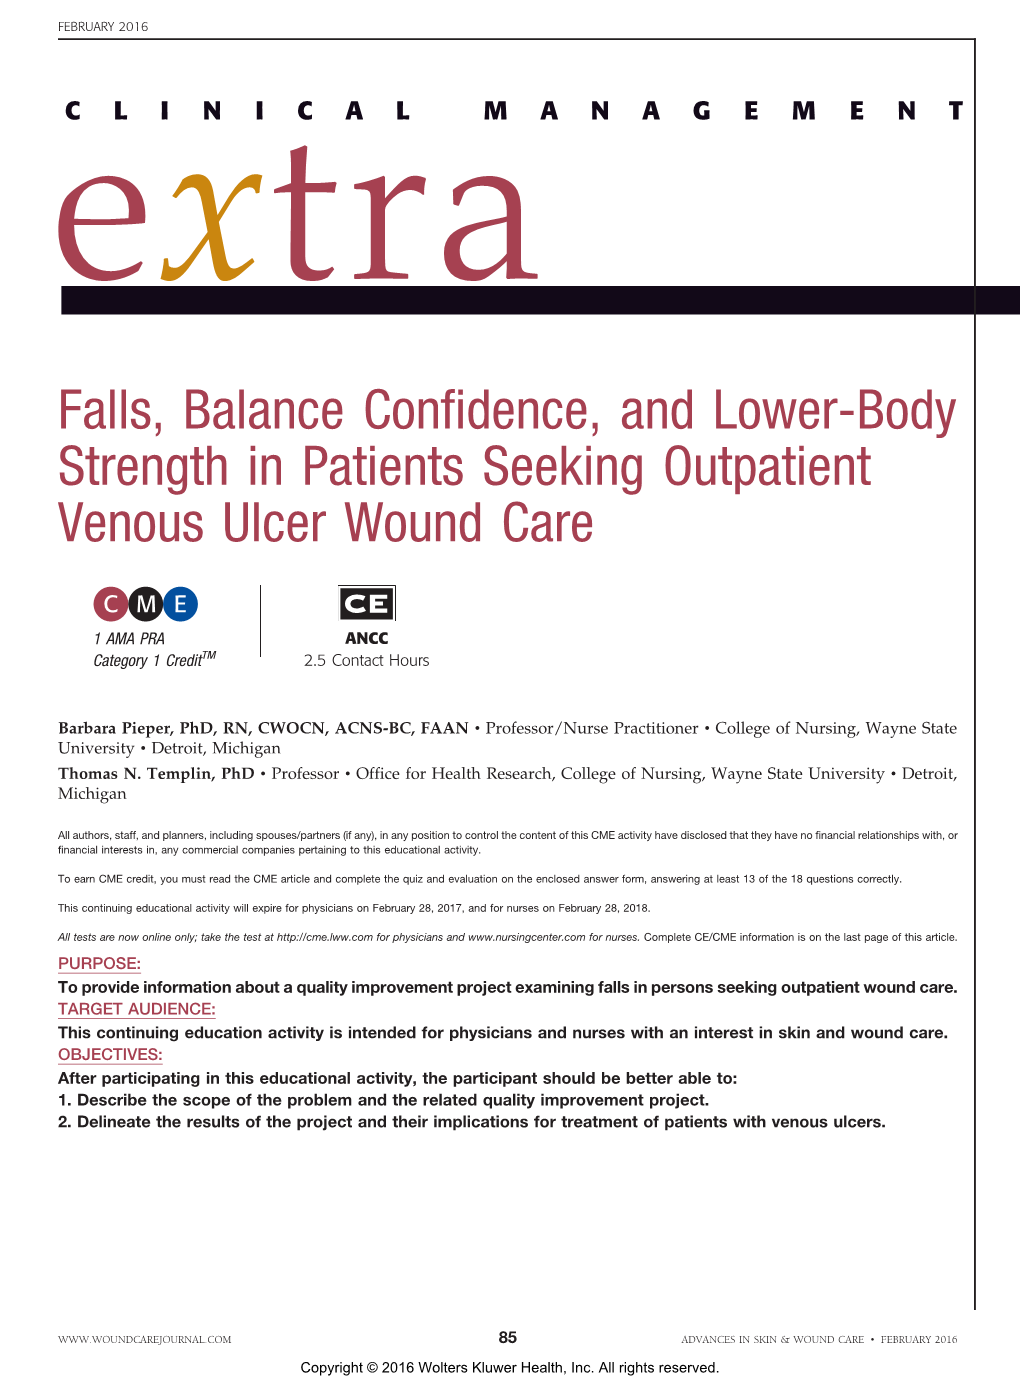 Falls, Balance Confidence, and Lower-Body Strength in Patients Seeking Outpatient Venous Ulcer Wound Care